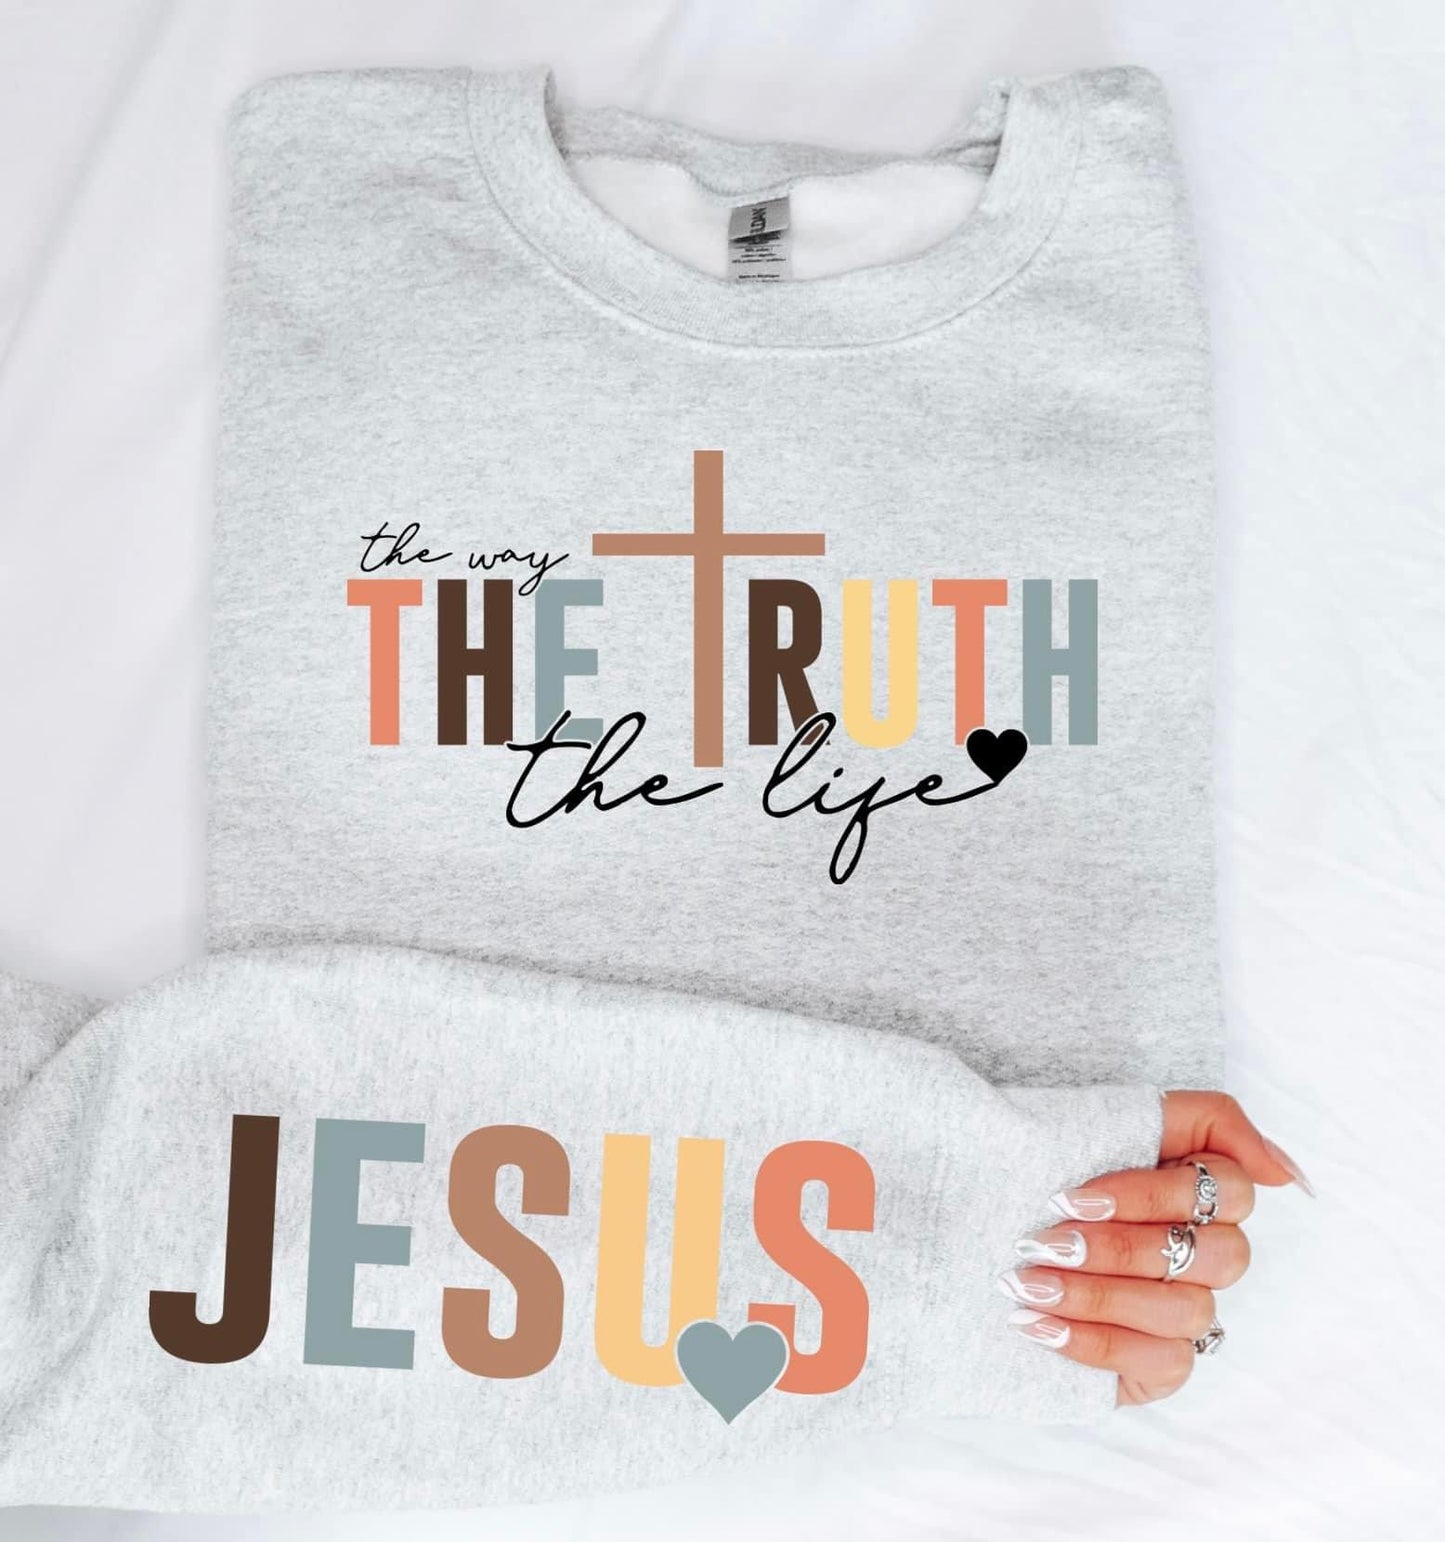 THE WAY THE TRUTH THE LIFE JESUS